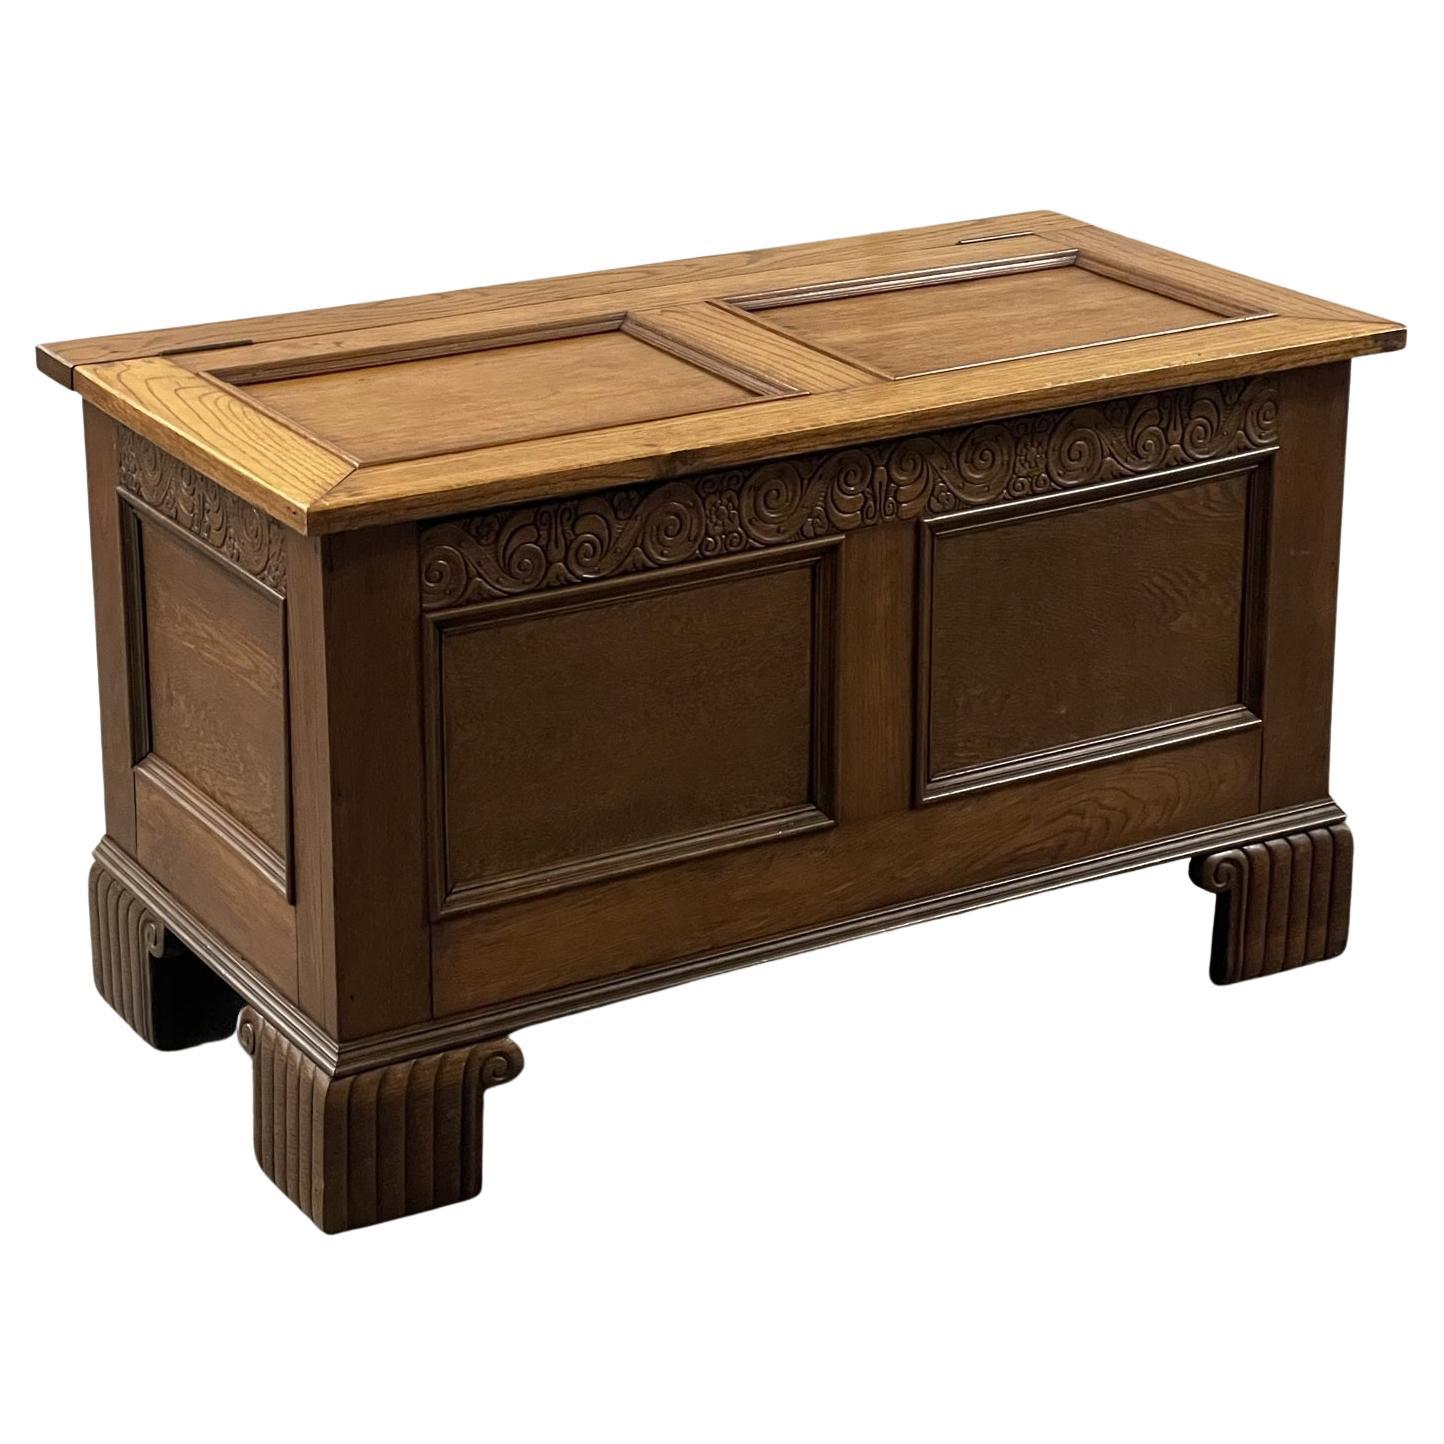 Early 20th Century Oak Blanket Chest Trunk With Scroll Carved Detailing